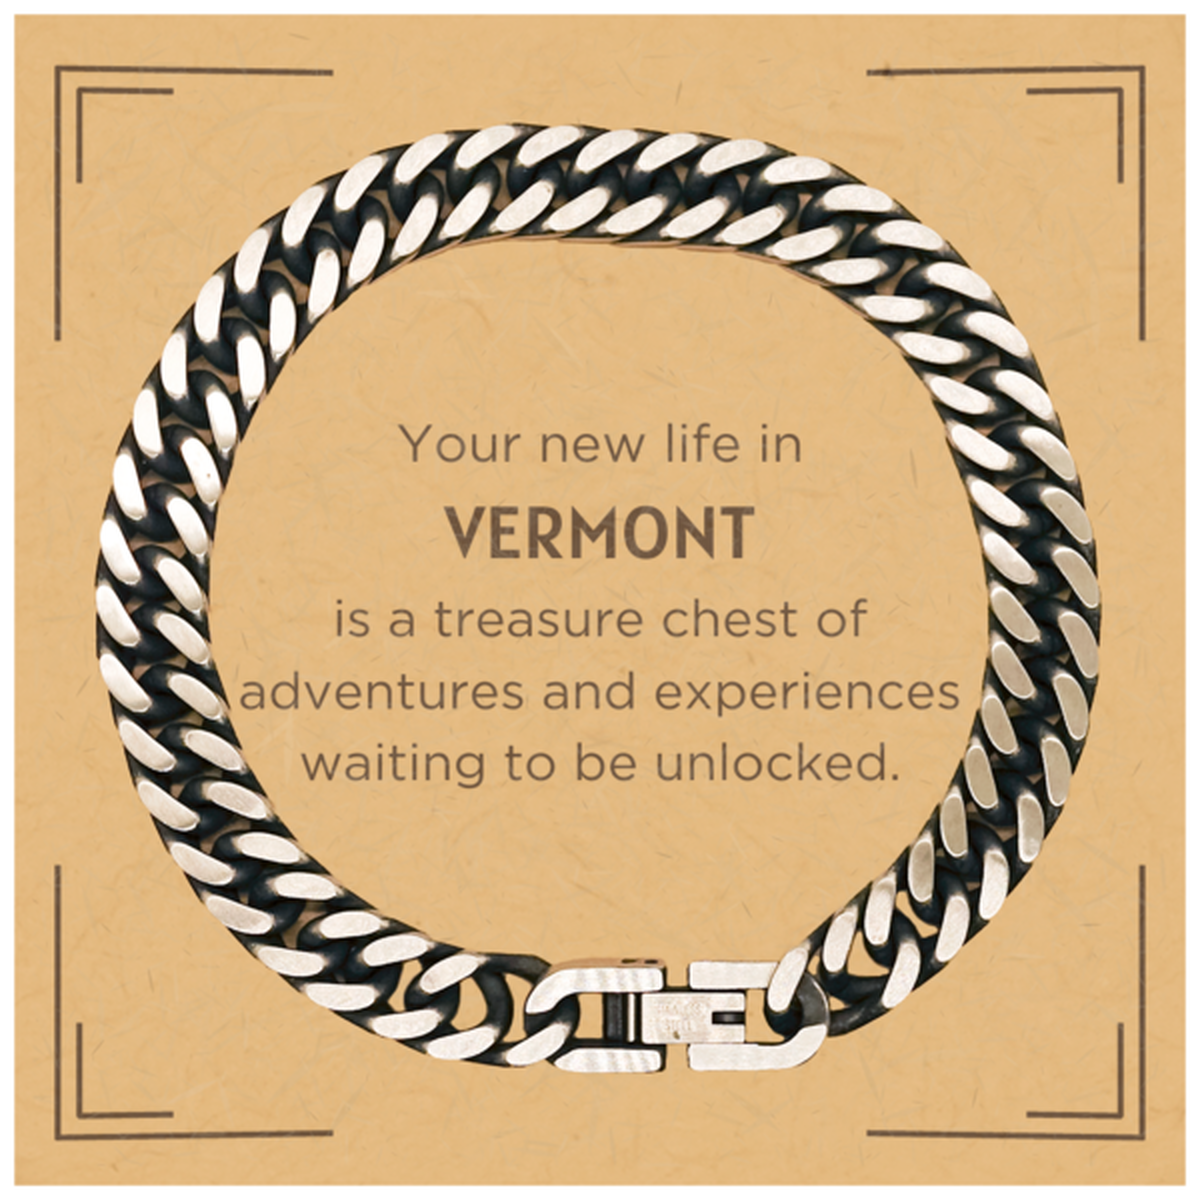 Moving to Vermont Gifts, Your new life in Vermont, Long Distance Vermont Christmas Cuban Link Chain Bracelet For Men, Women, Friends, Coworkers